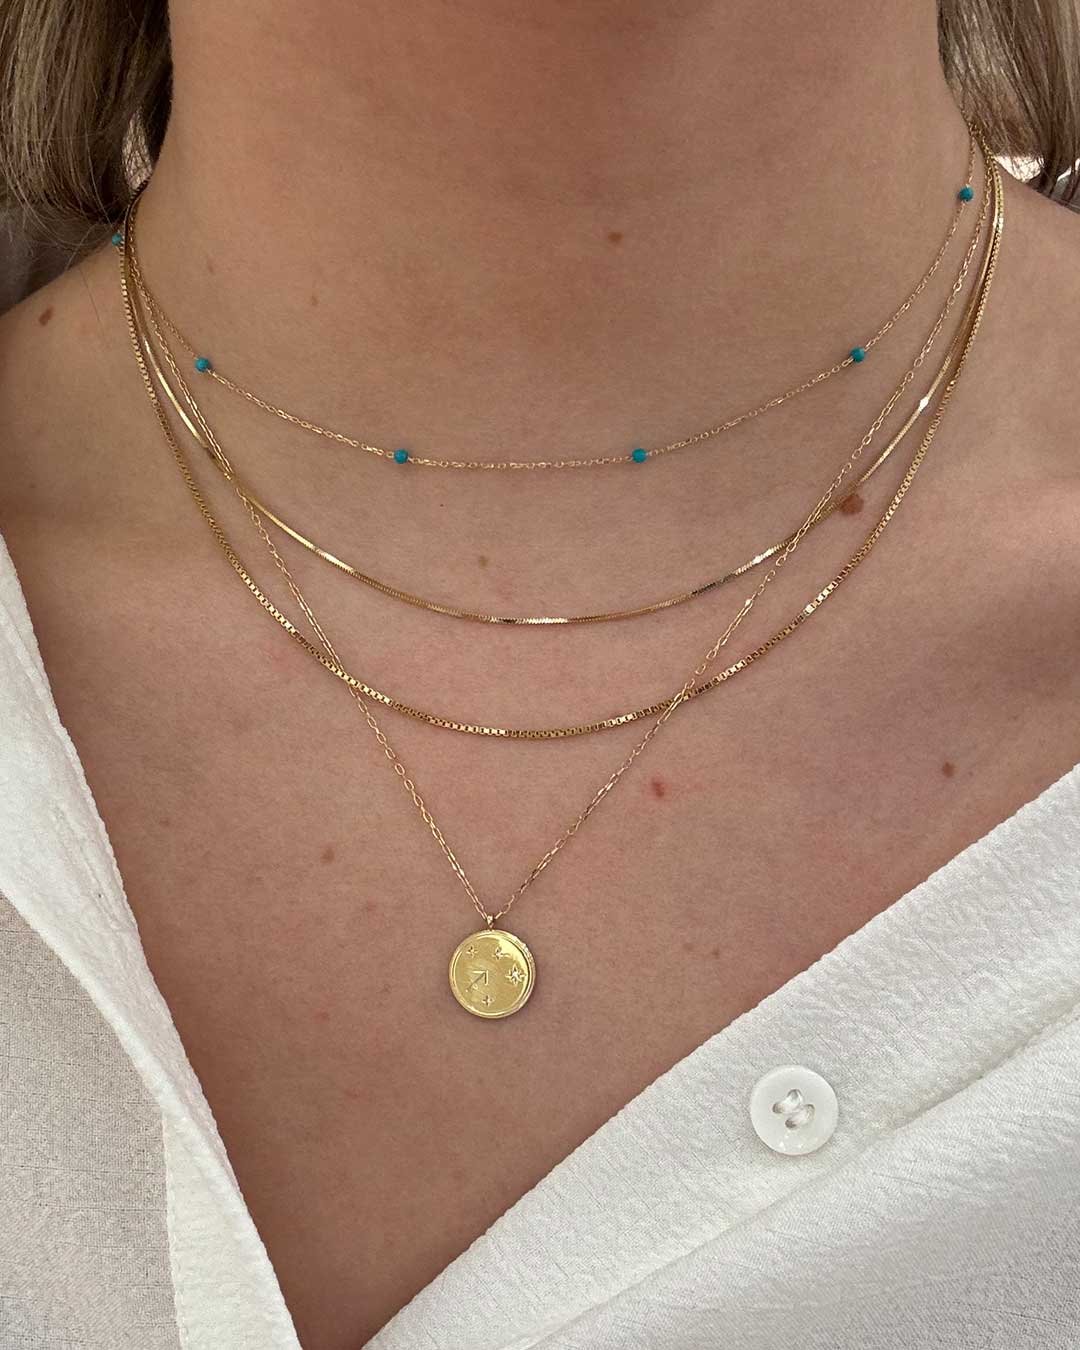 Stylist wearing The Turquoise Newport Necklace, 14k Gold Micro Mini Vence Necklace, 14k Gold Box Chain Necklace and Diamond Zodiac Necklace.